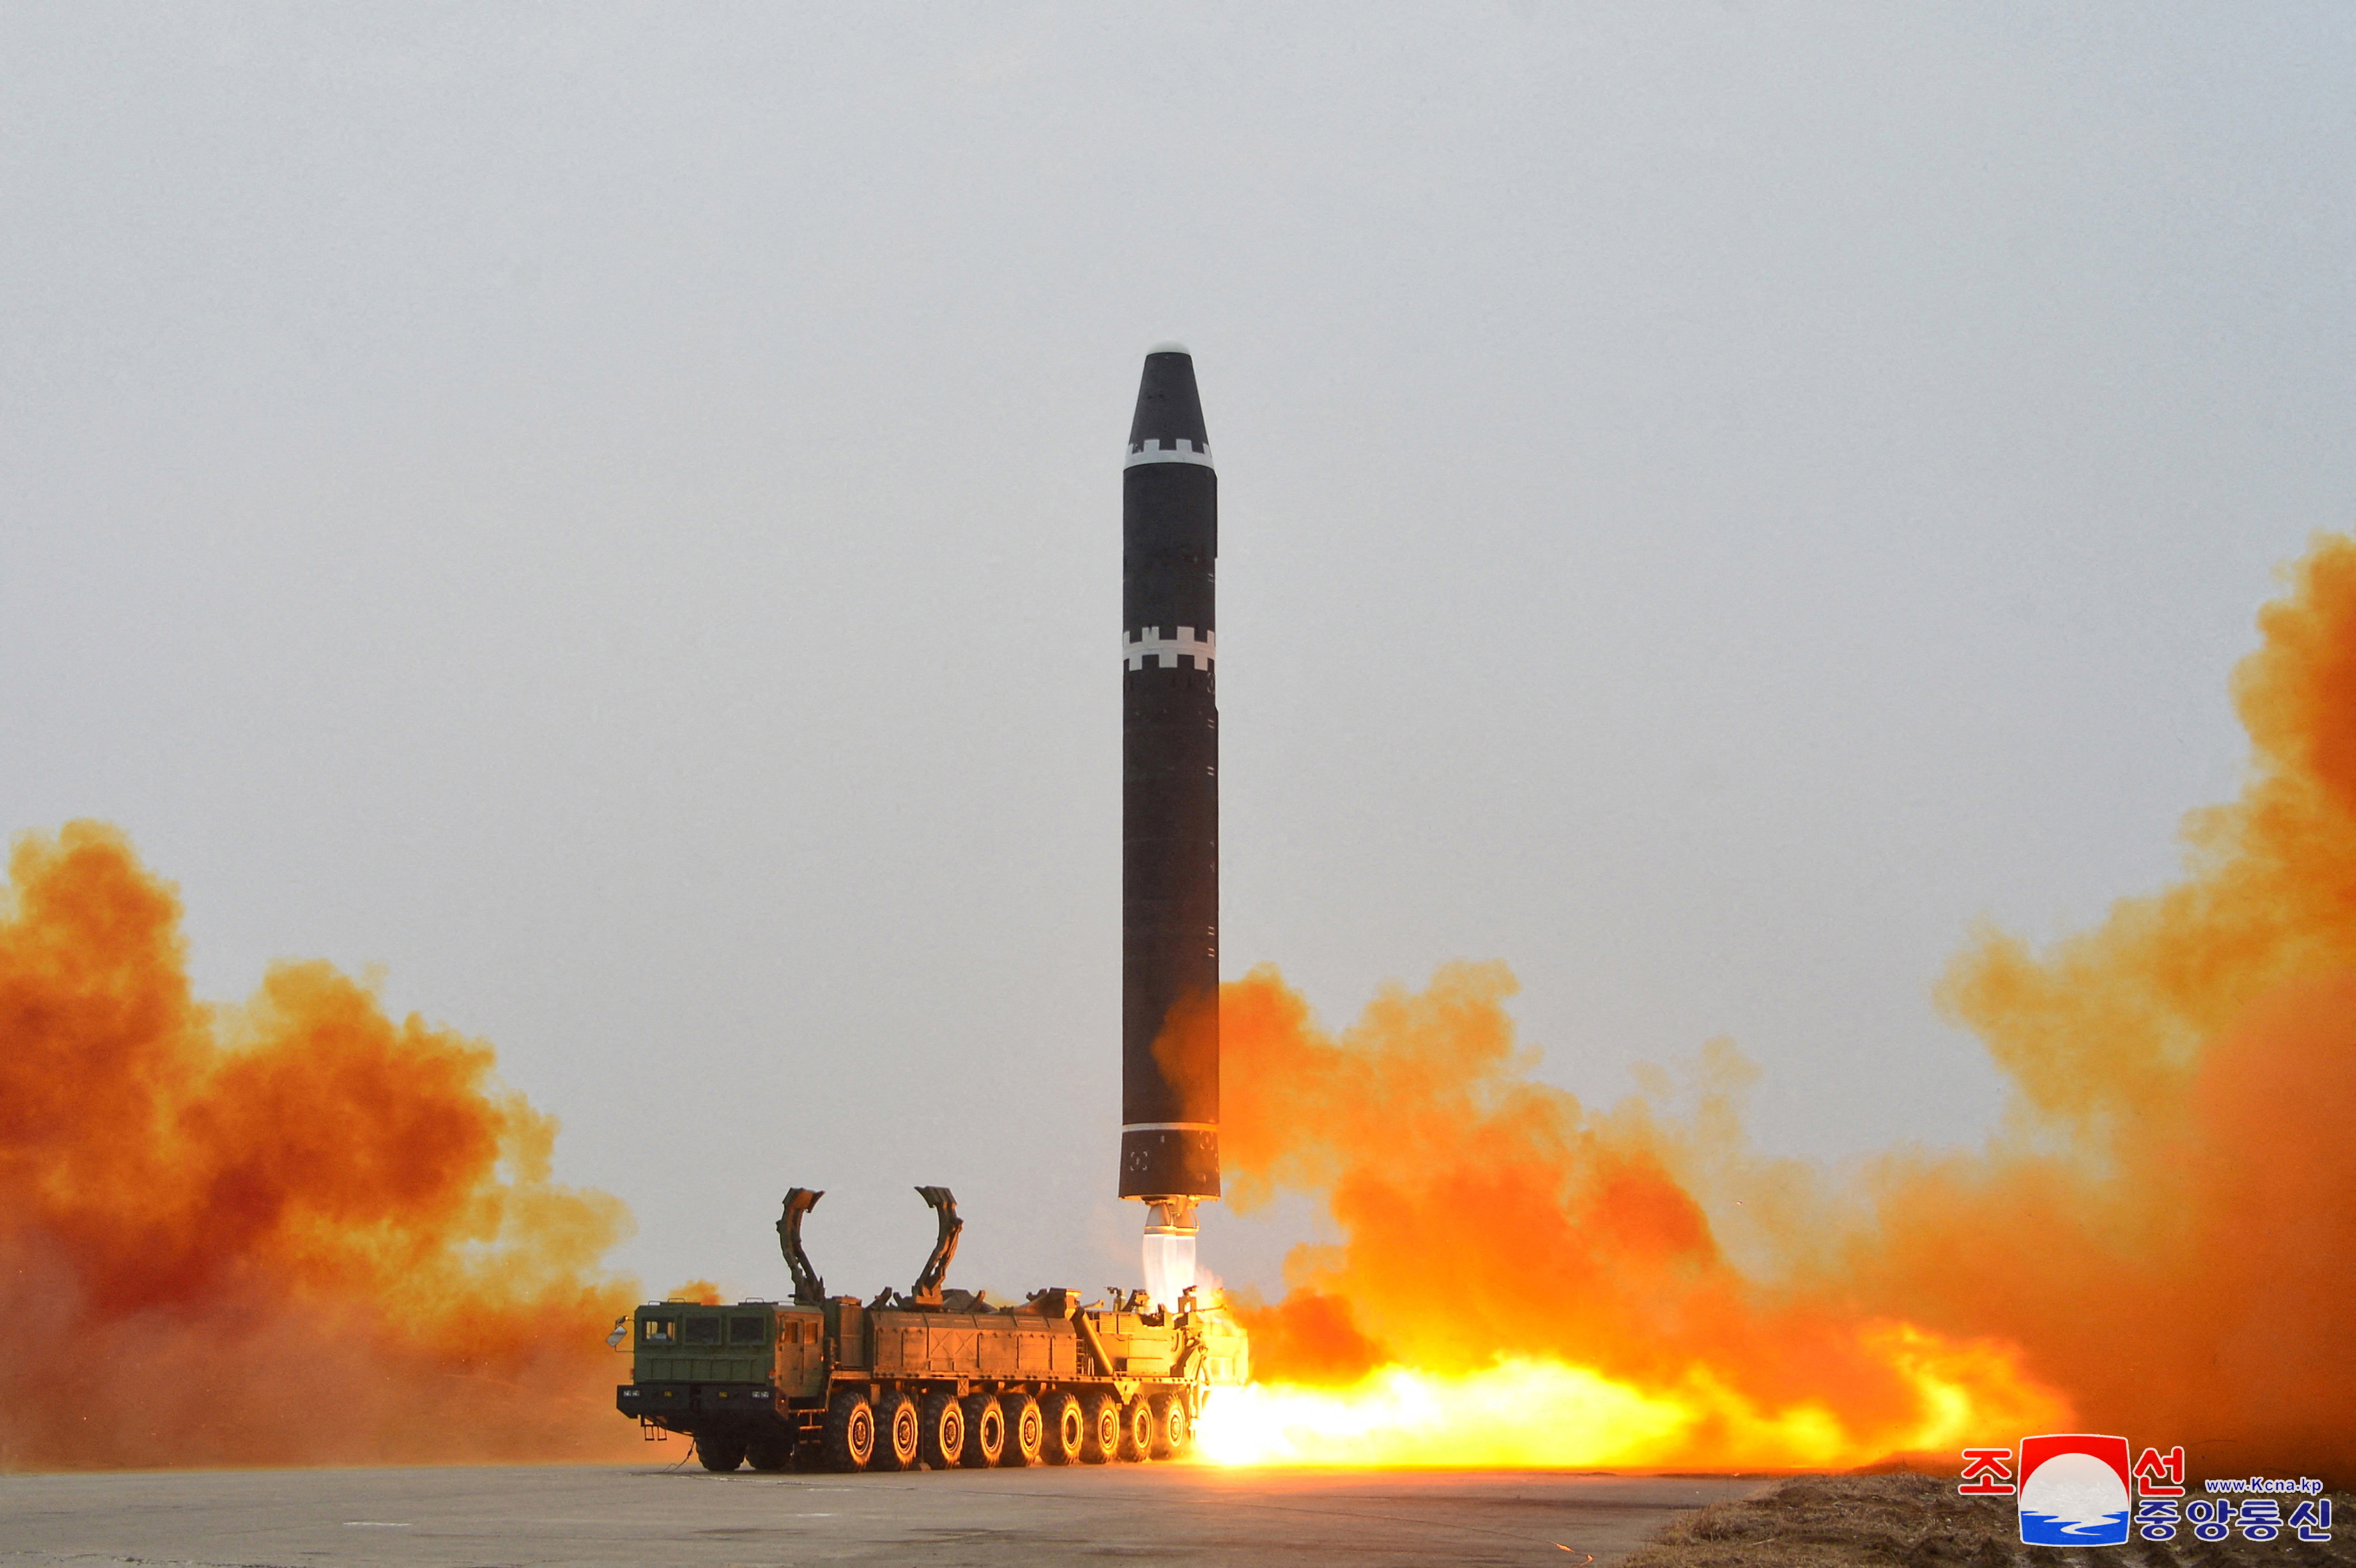 A Hwasong-15 intercontinental ballistic missile (ICBM) is launched at Pyongyang International Airport